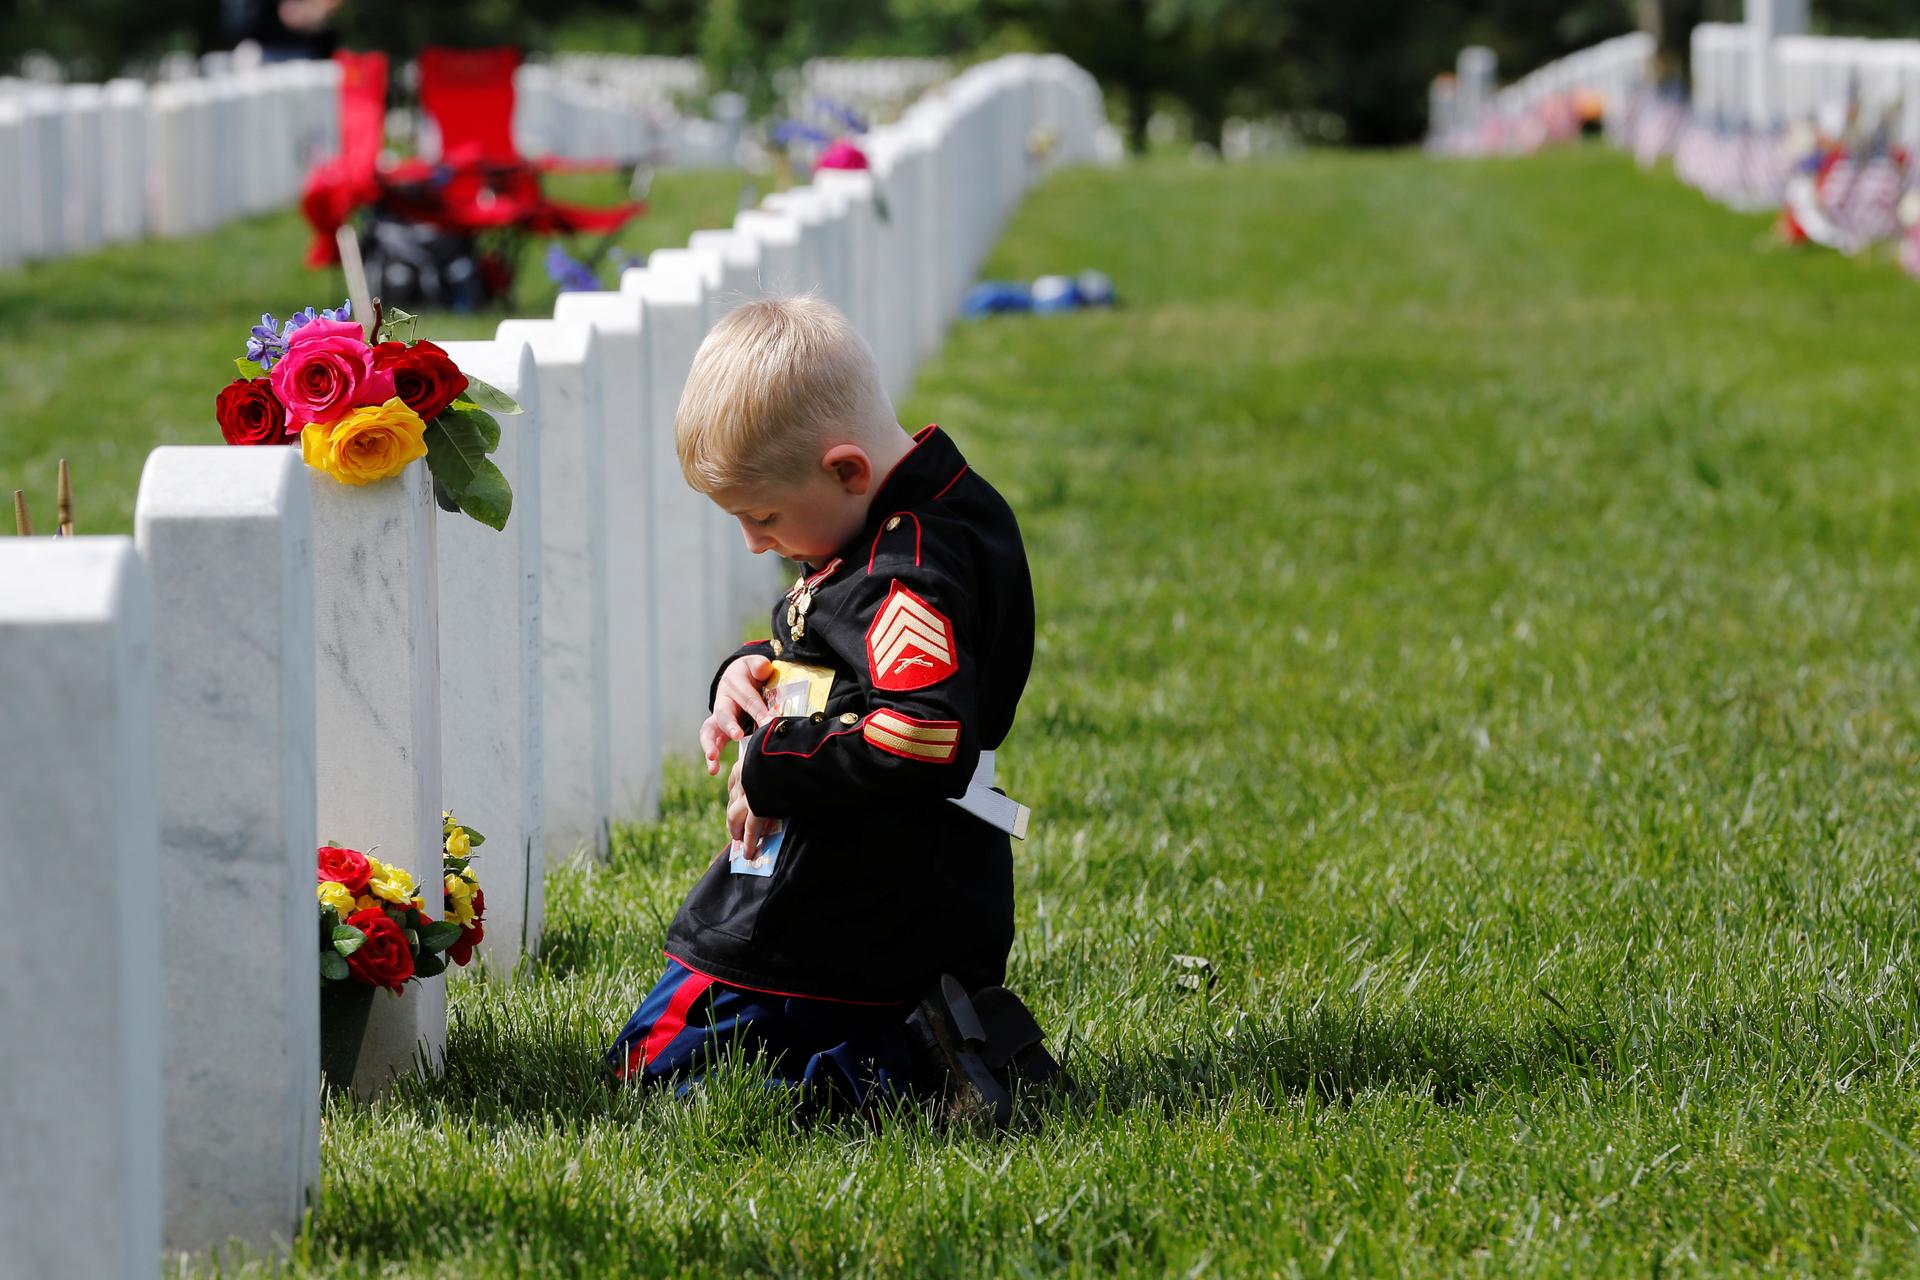 Christian Jacobs touches a photograph of his U.S. Marine father, Christopher Jacobs, while visiting his grave on Memorial Day at Arlington National Cemetery in Washington, U.S., May 30, 2016.